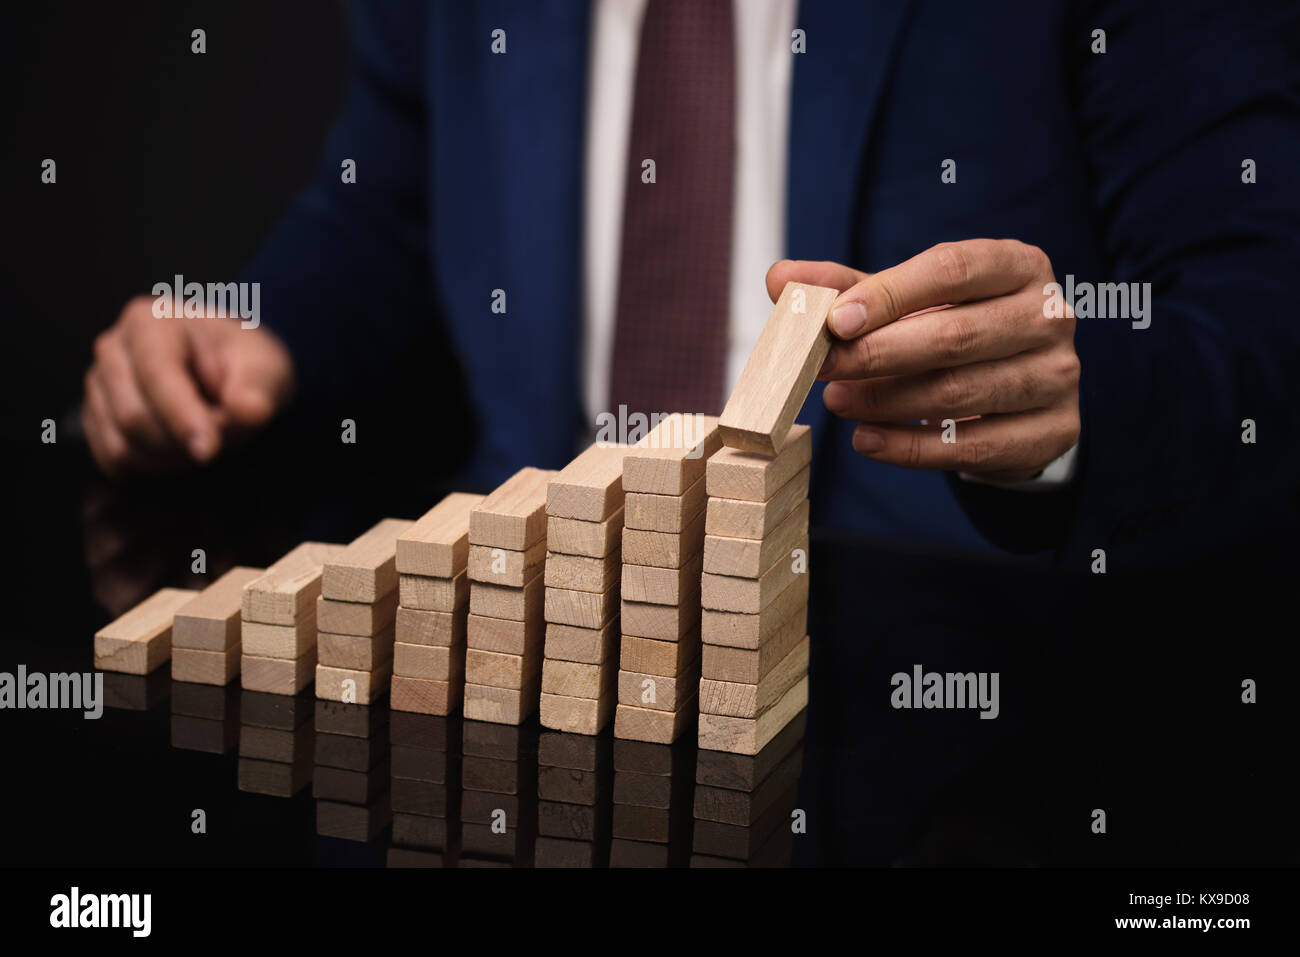 Businessman building a increasing graph or ladder of success on black table. Stock Photo